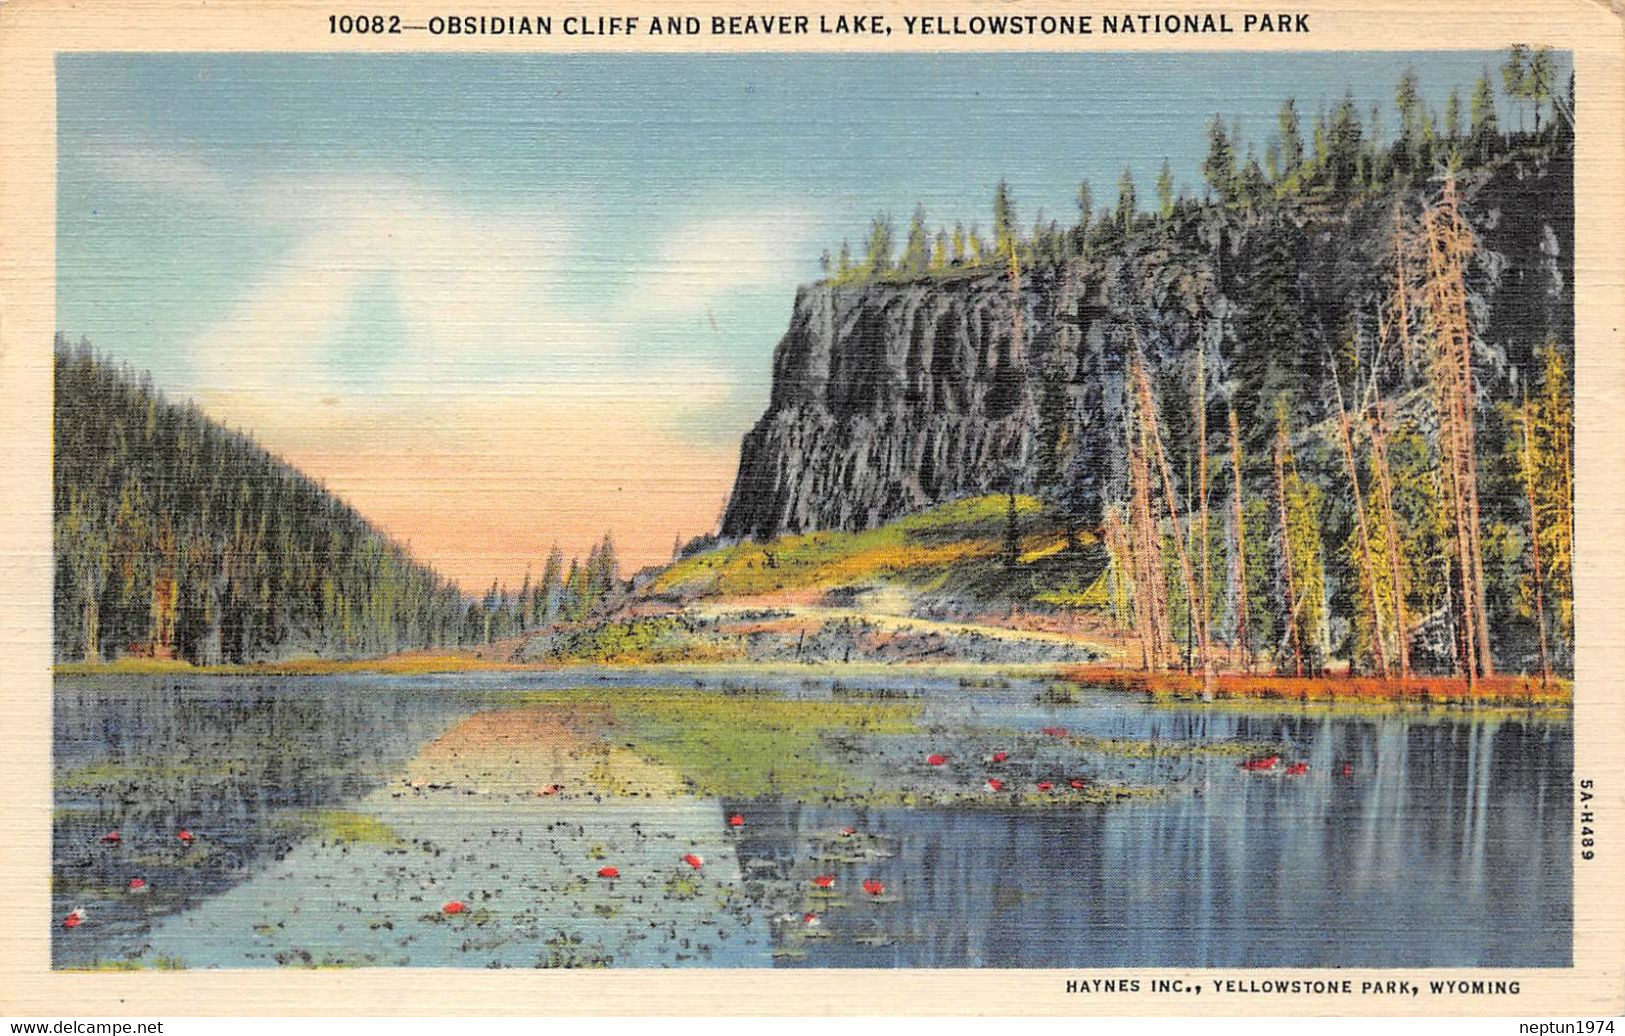 Yellowstone National Park, Obsidian Cliff And Beaver Lake - Yellowstone